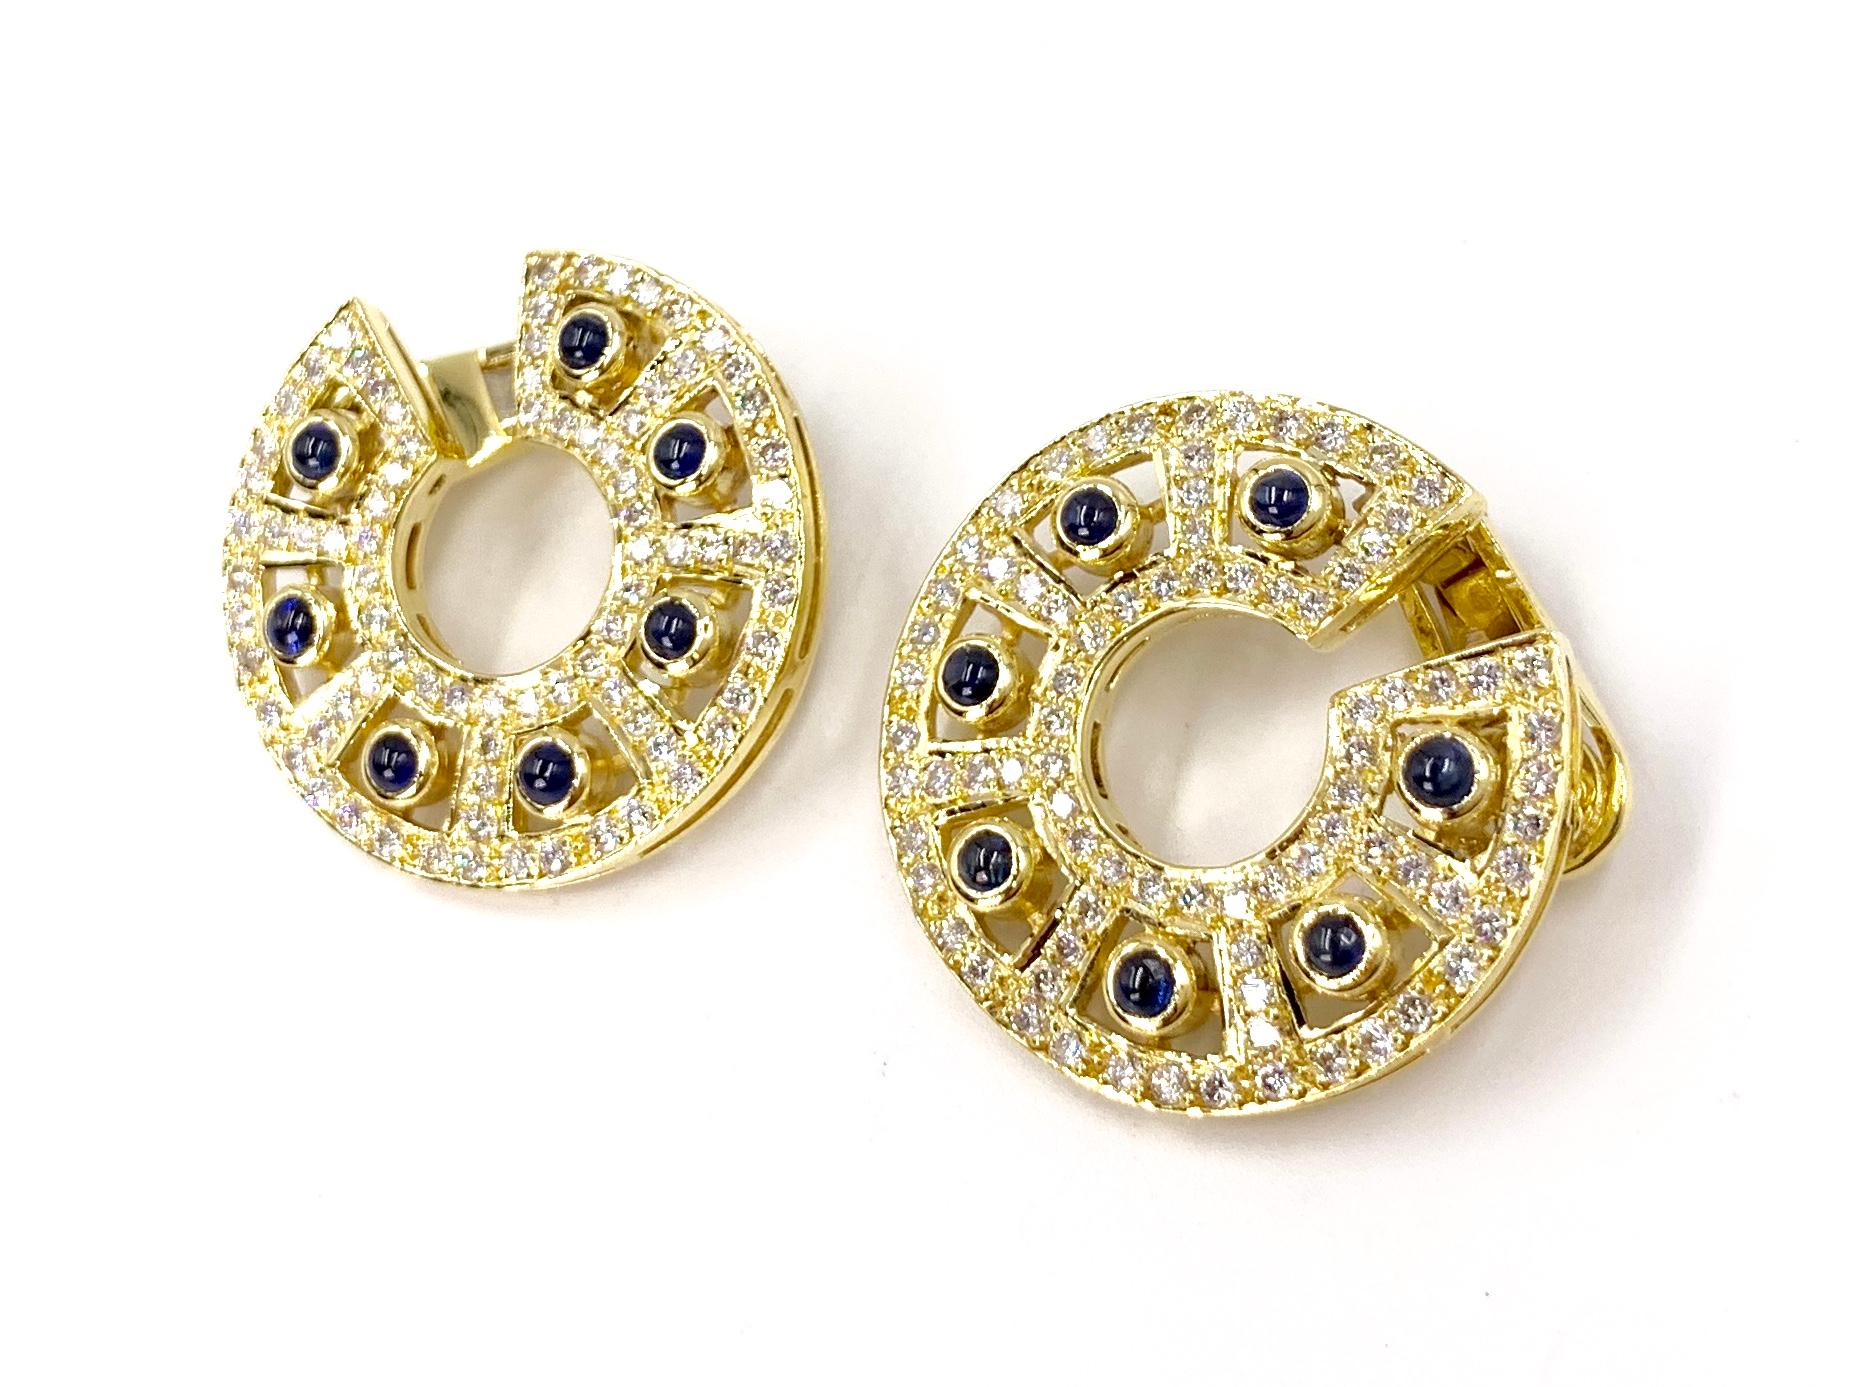 18 Karat Diamond and Sapphire Fancy Hoop Earring In Excellent Condition For Sale In Pikesville, MD